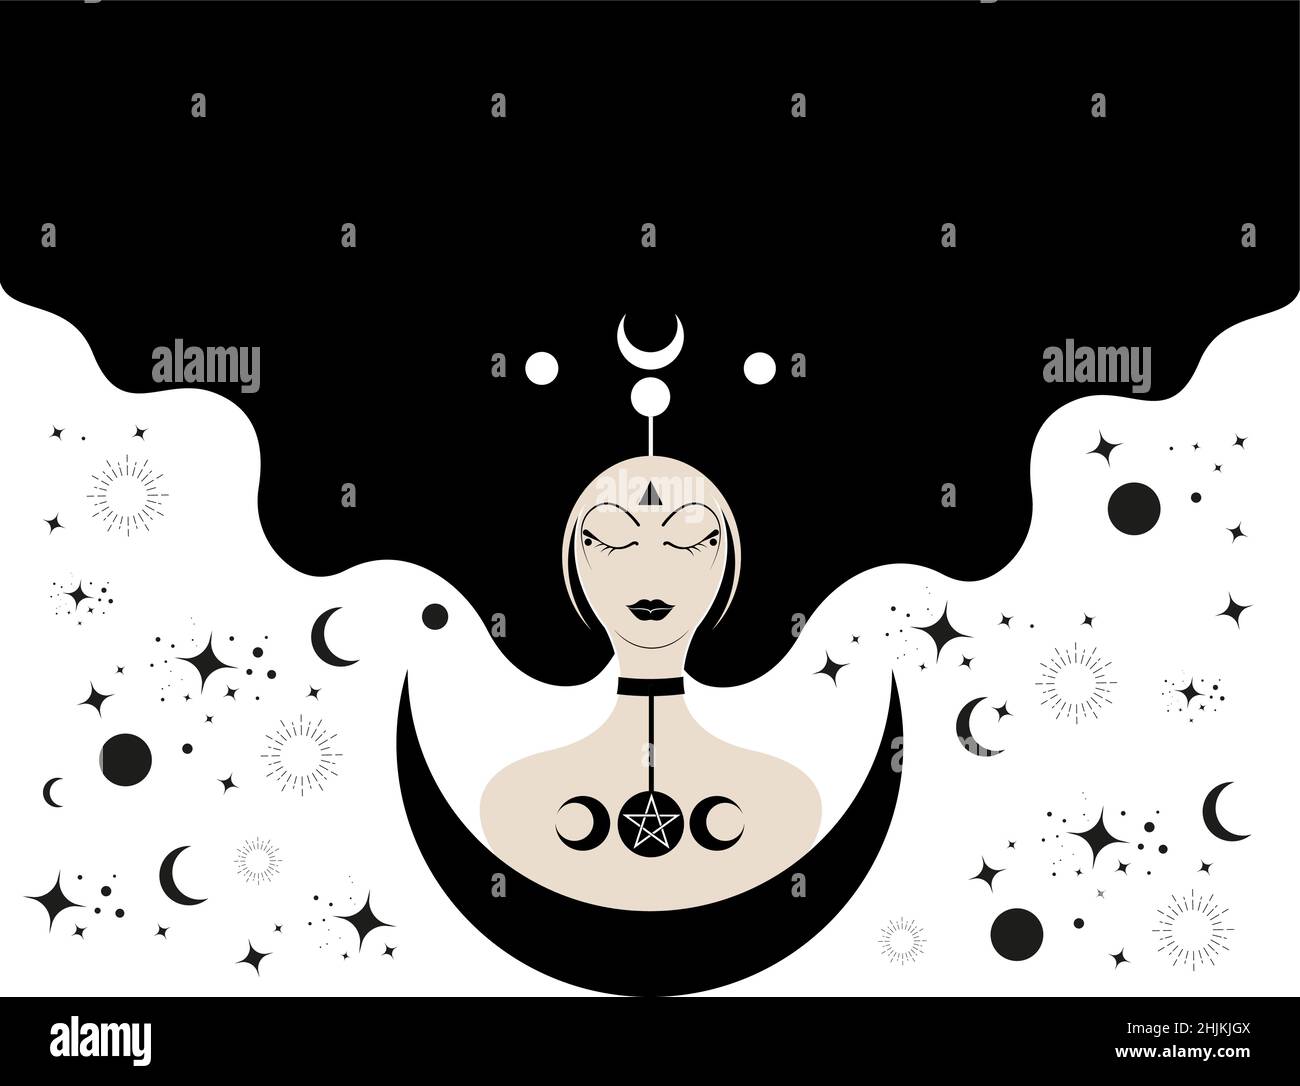 Priestess with lonh hair, template. Crescent moon, sacred wiccan woman goddess icon. Triple Moon Religious Wicca sign. Neopaganism symbols on white Stock Vector